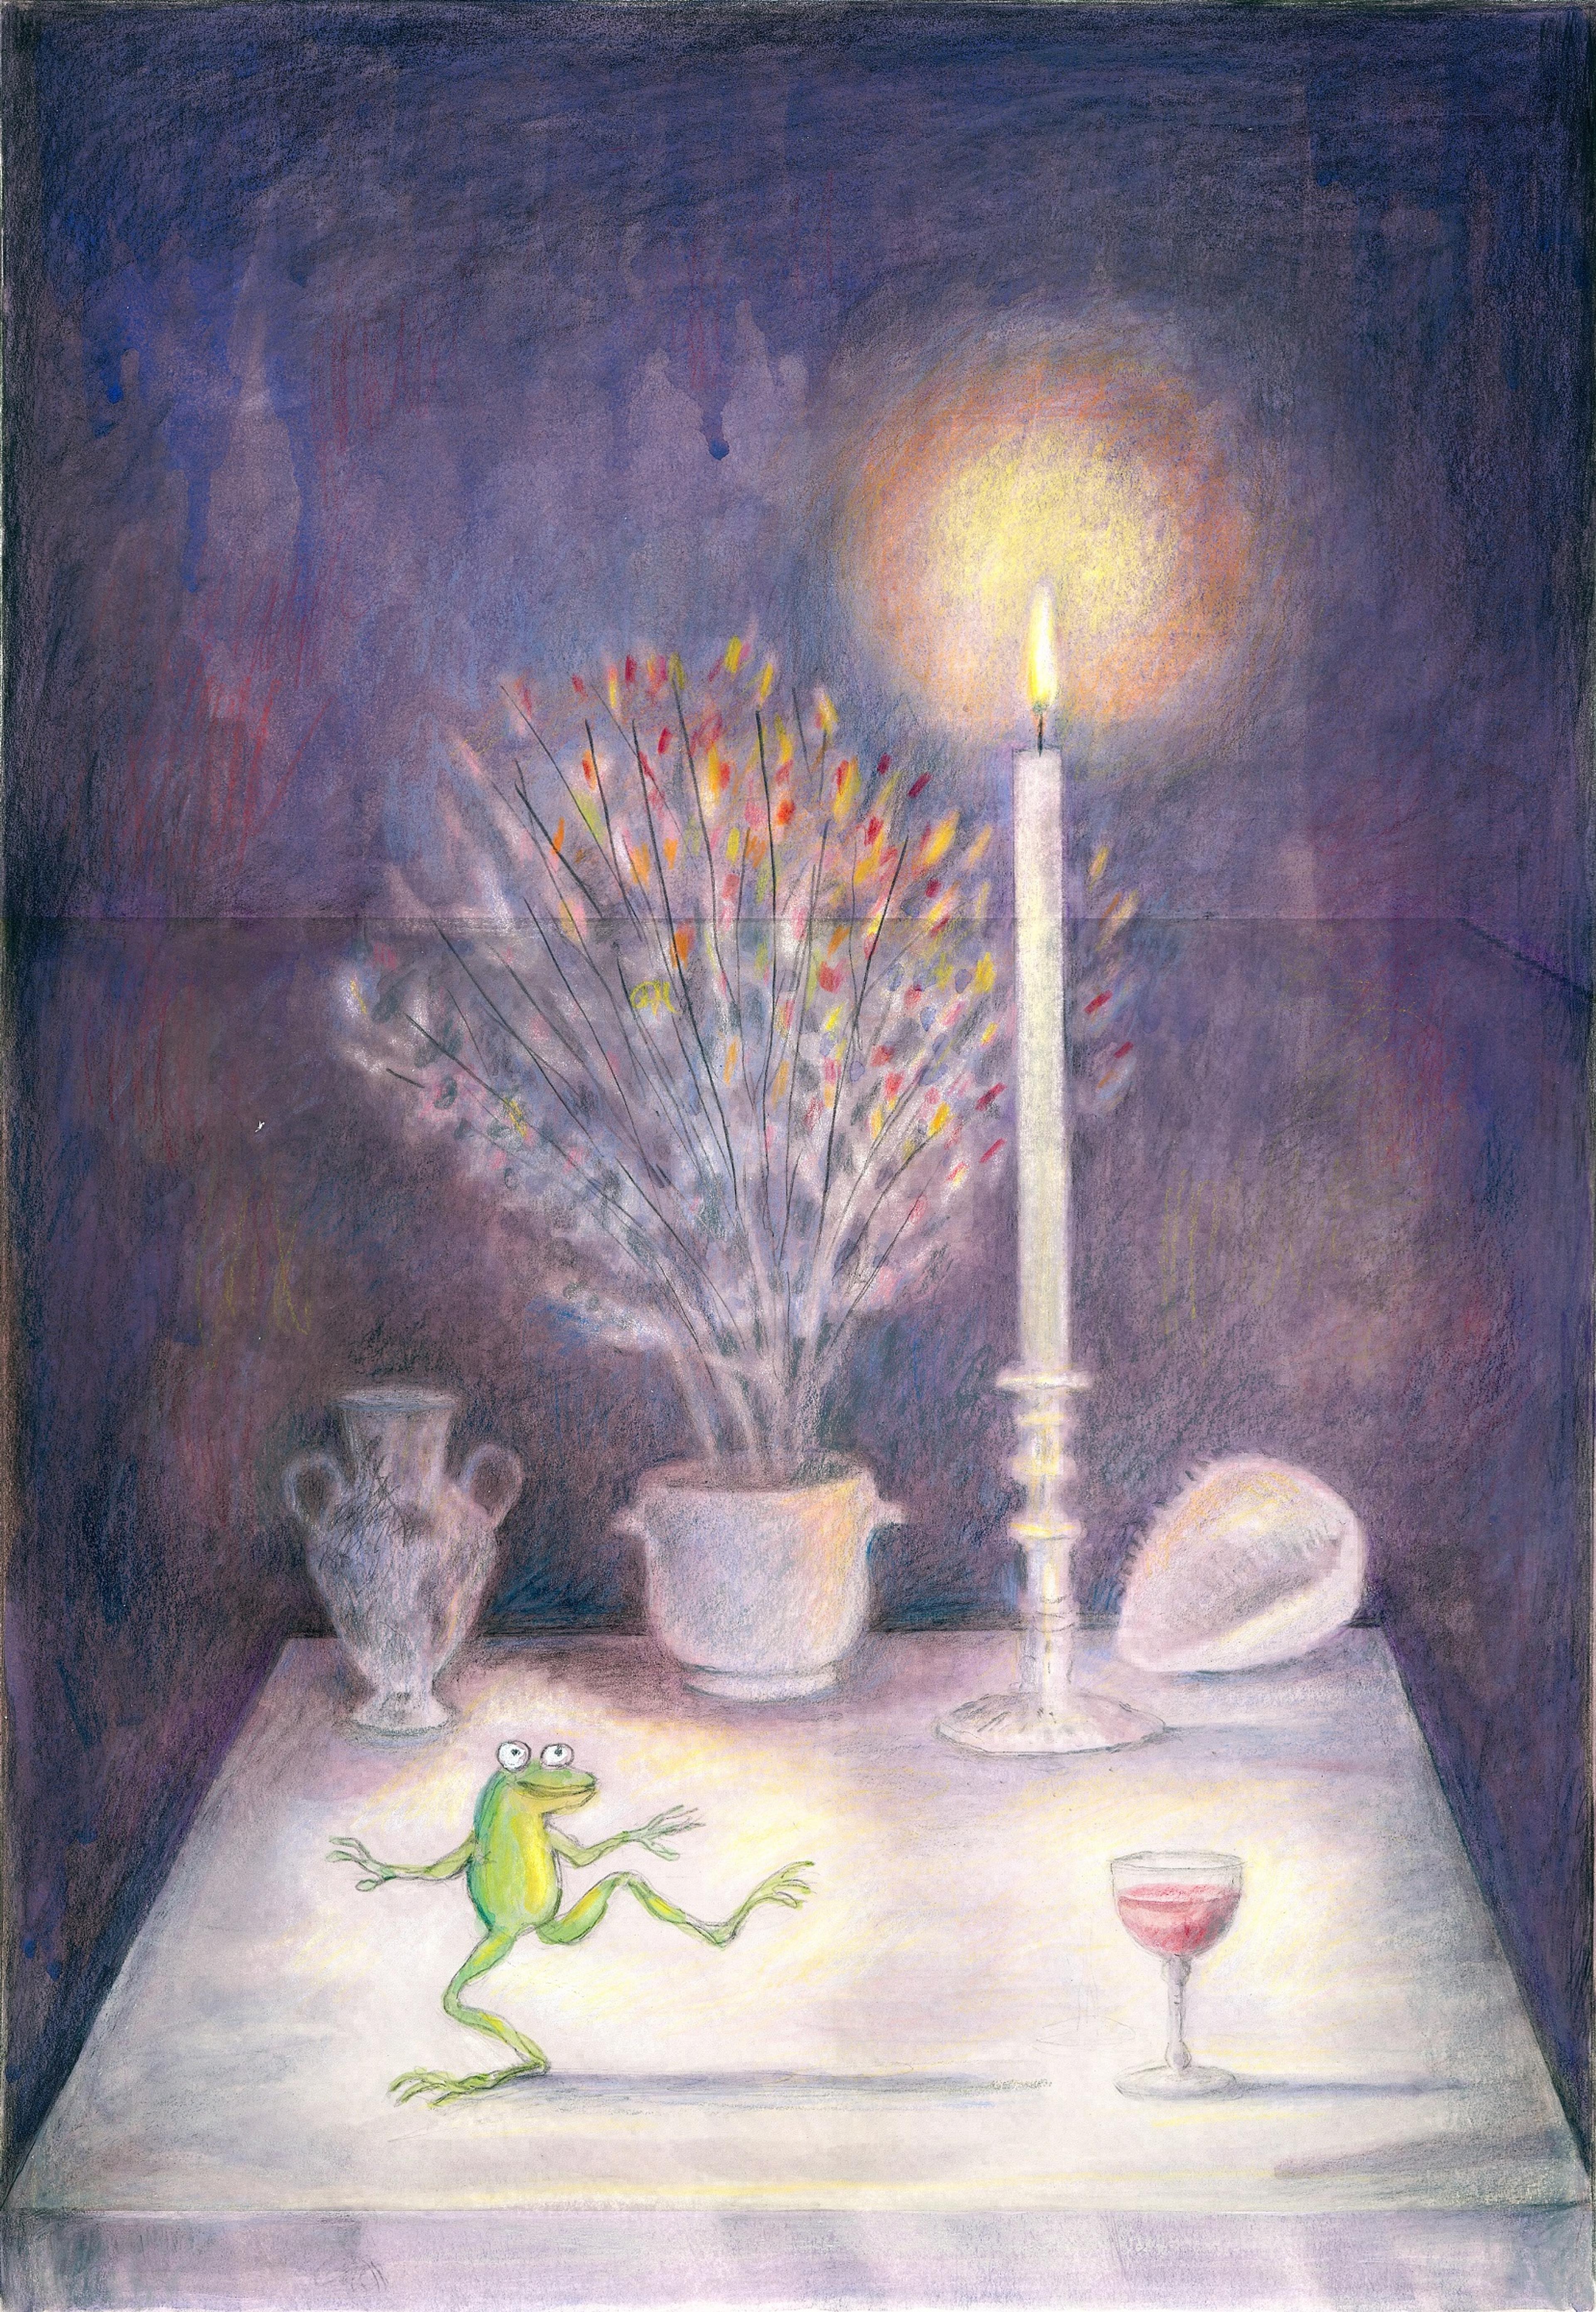 Illustration of a table top with a vase of flowers, a glass of wine and a frog